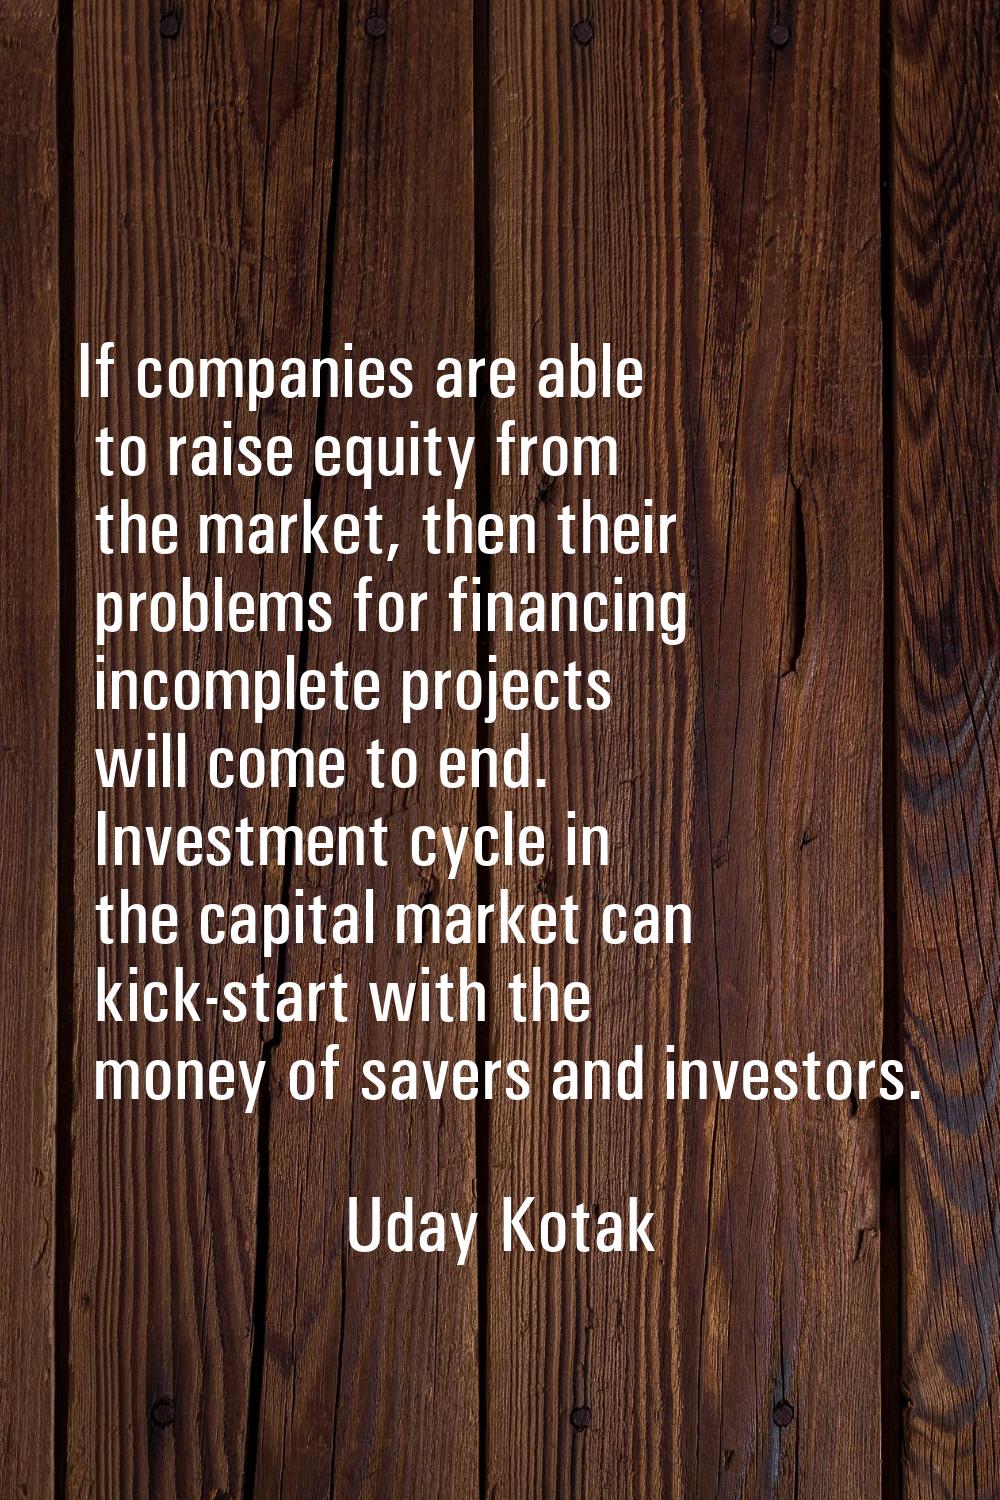 If companies are able to raise equity from the market, then their problems for financing incomplete